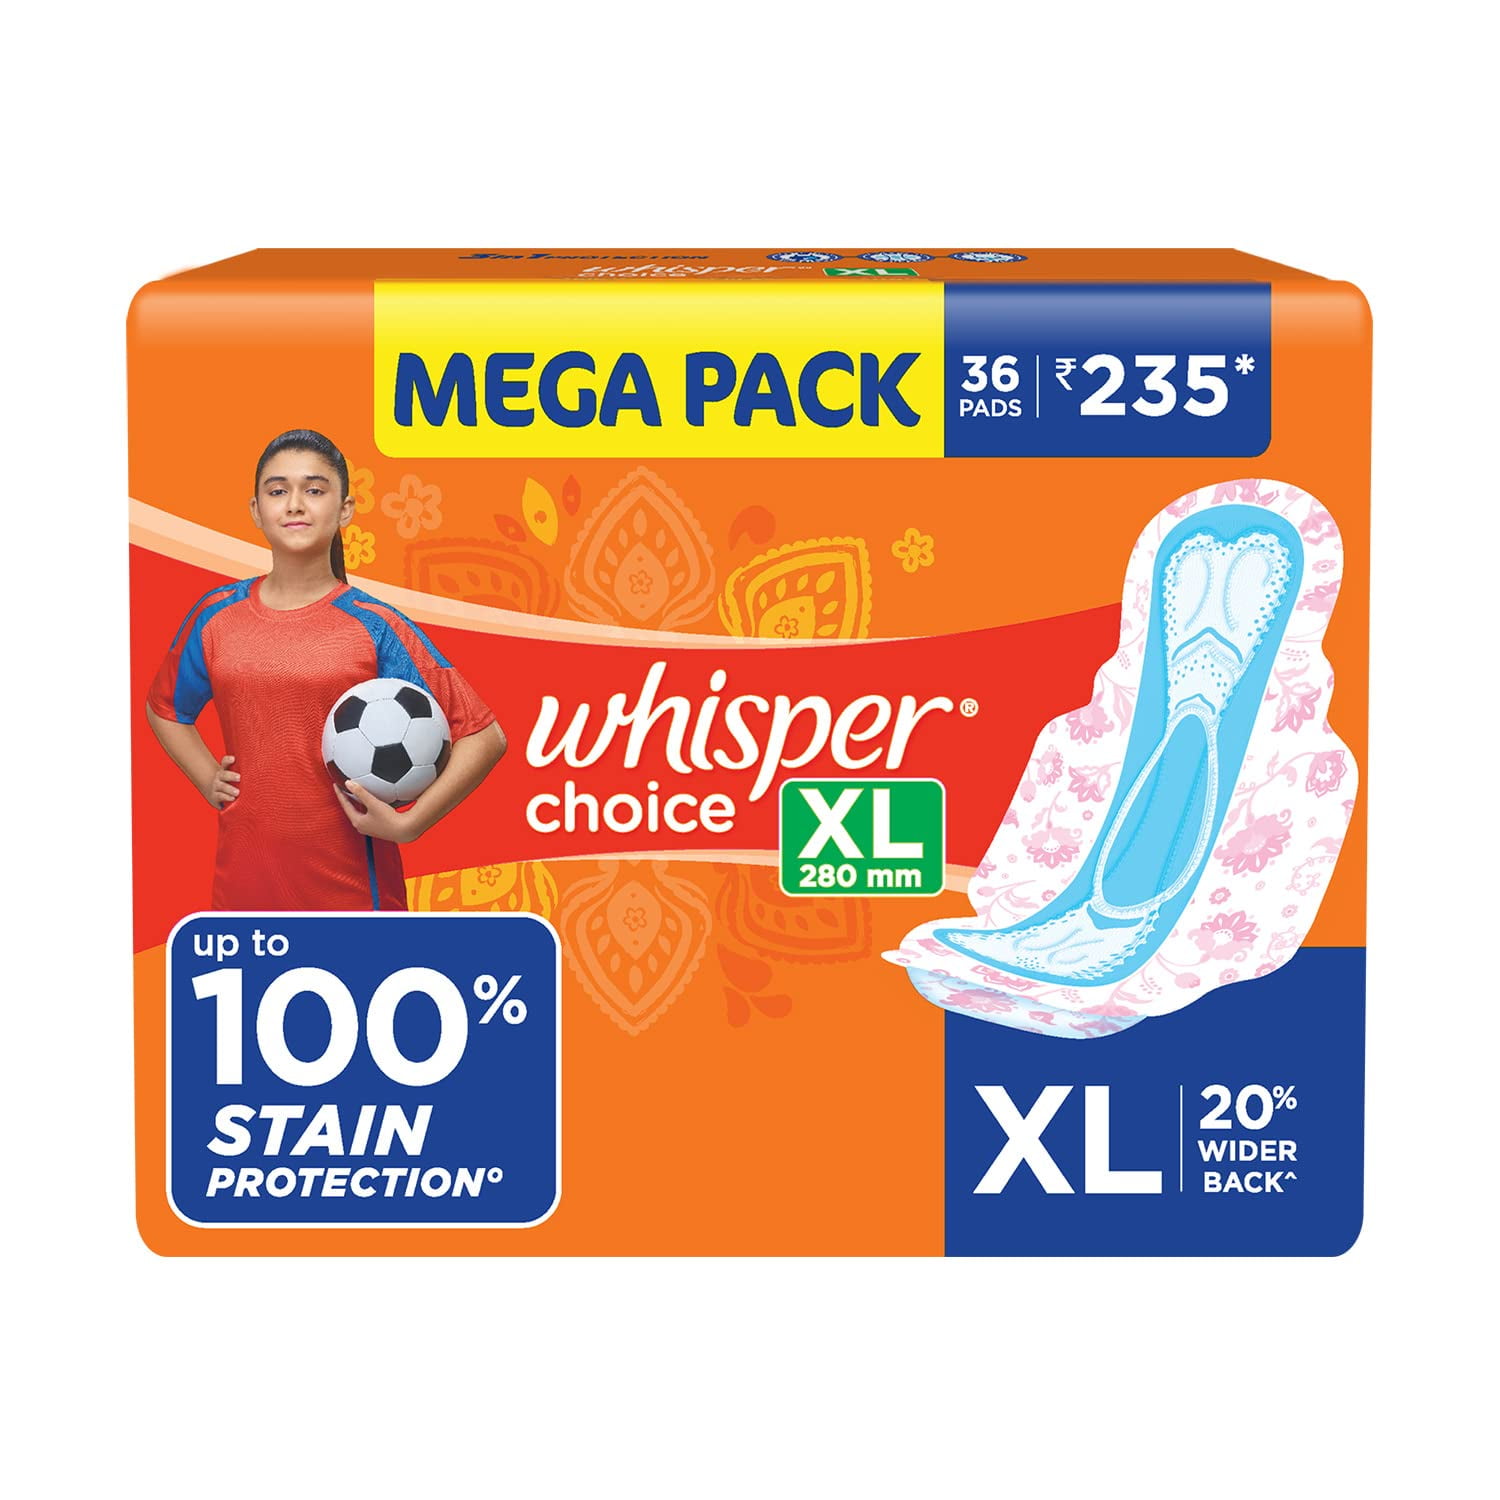 Whisper Choice Wings Sanitary Pads XL, 6 Count Price, Uses, Side Effects,  Composition - Apollo Pharmacy